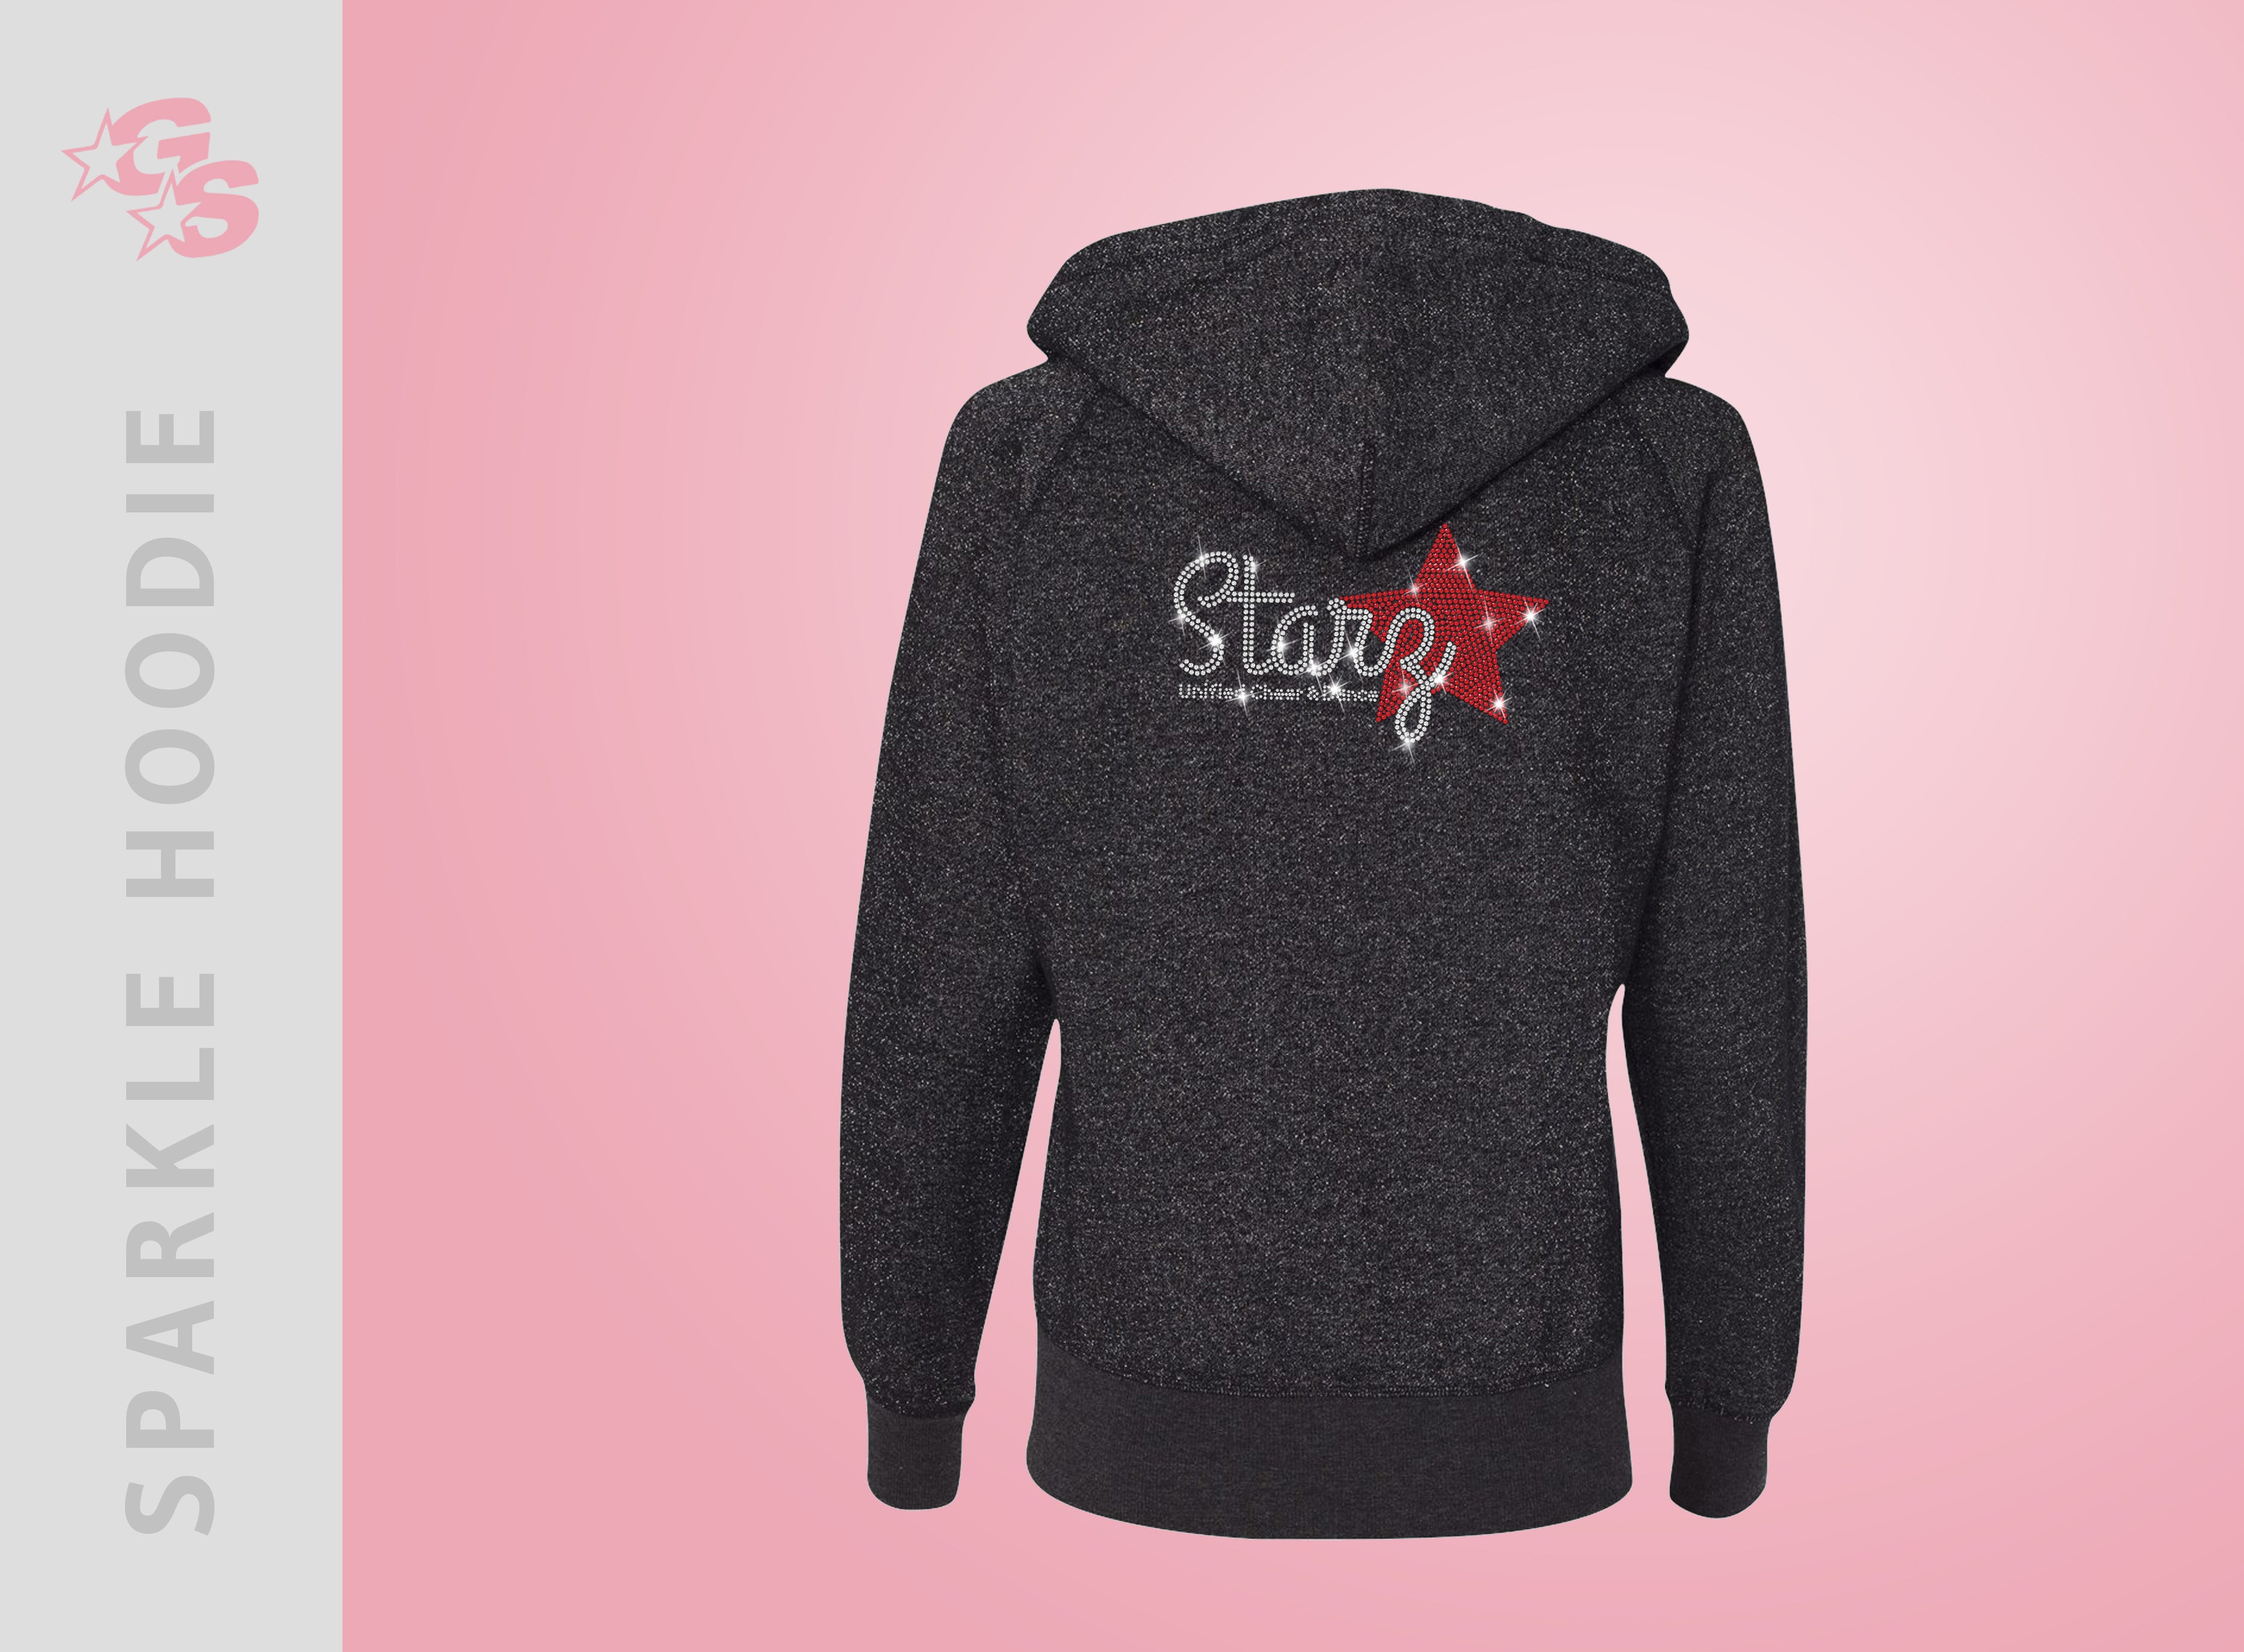 Special Olympic Starz Unified Cheer and Dance Sparkle Hoodie